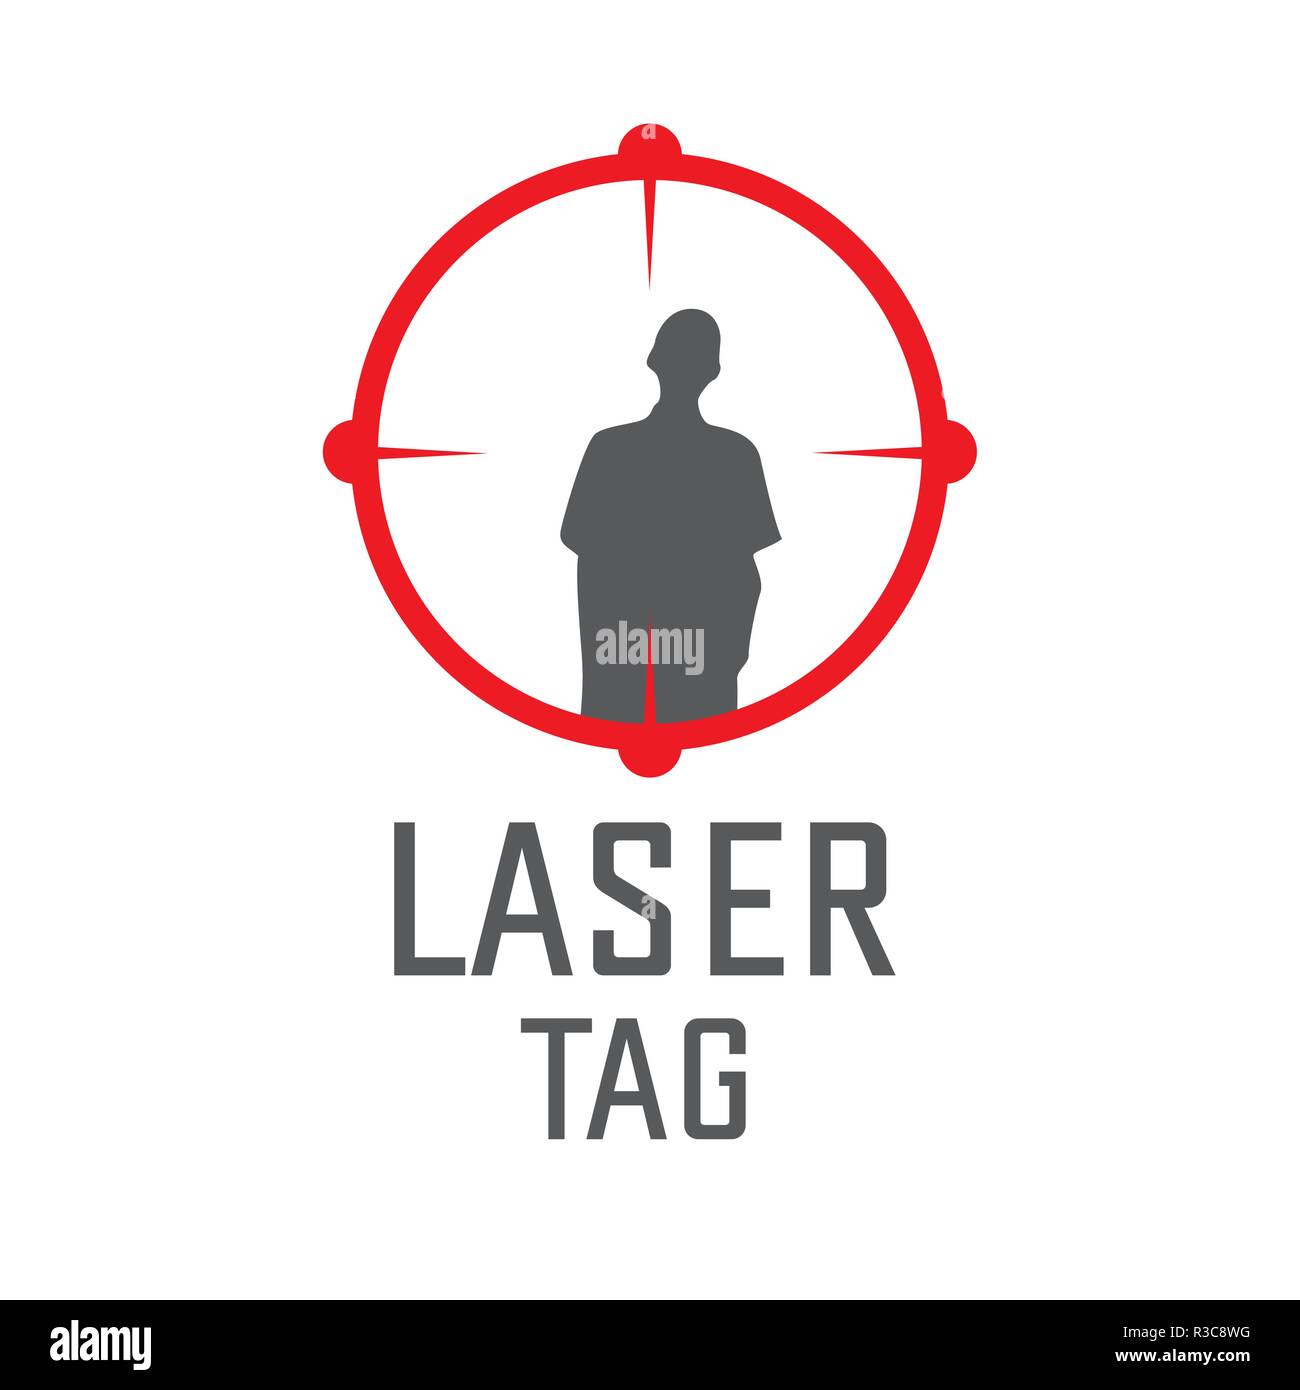 vector logo for laser tag and airsoft Stock Vector